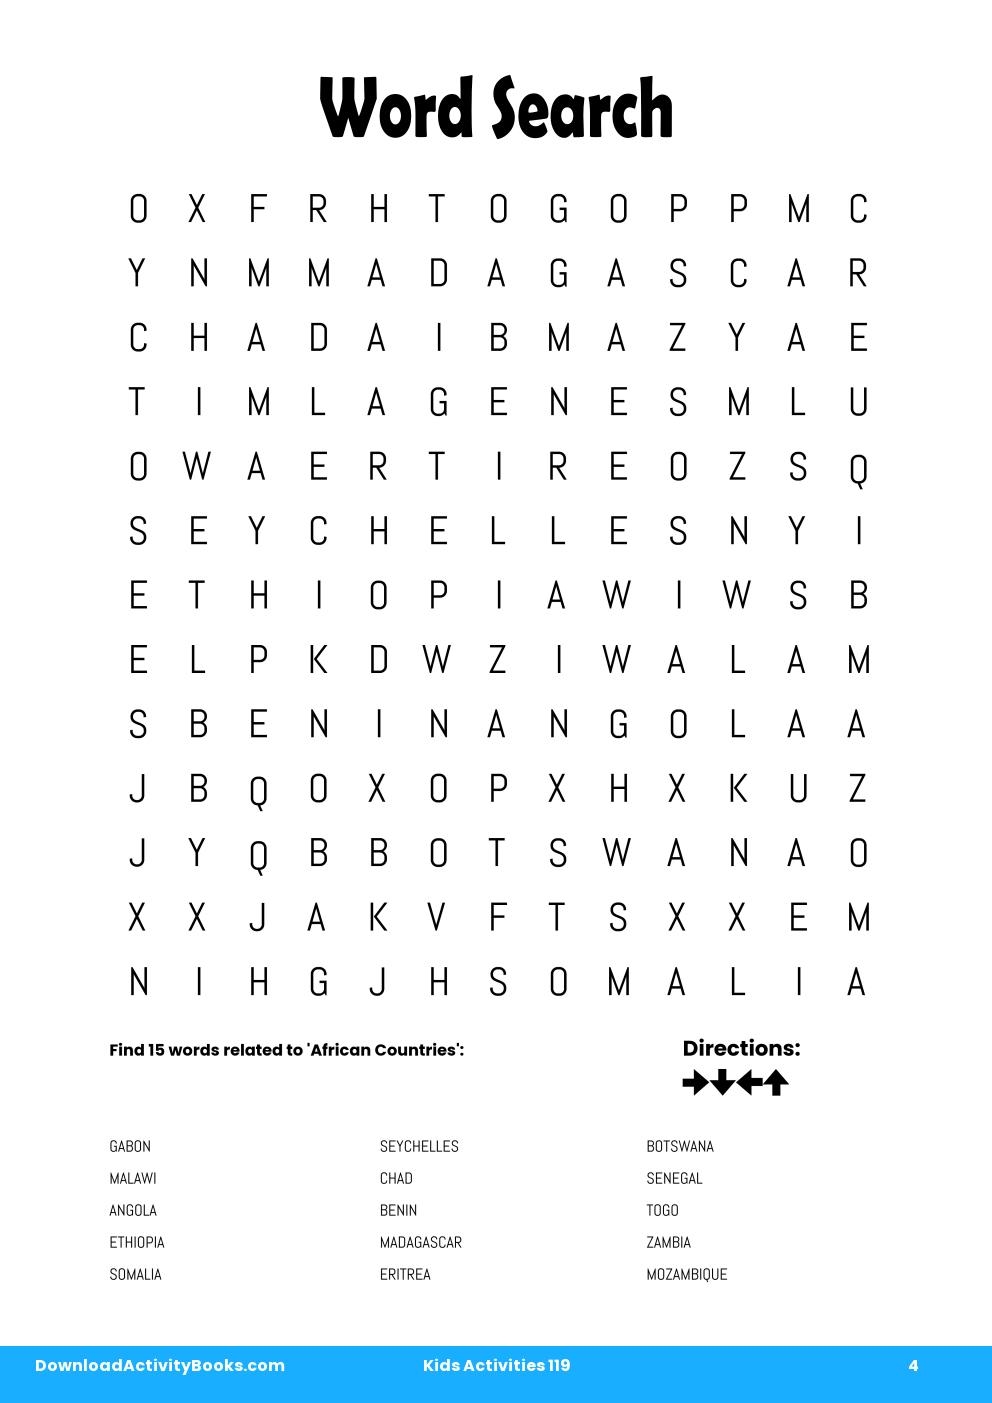 Word Search in Kids Activities 119